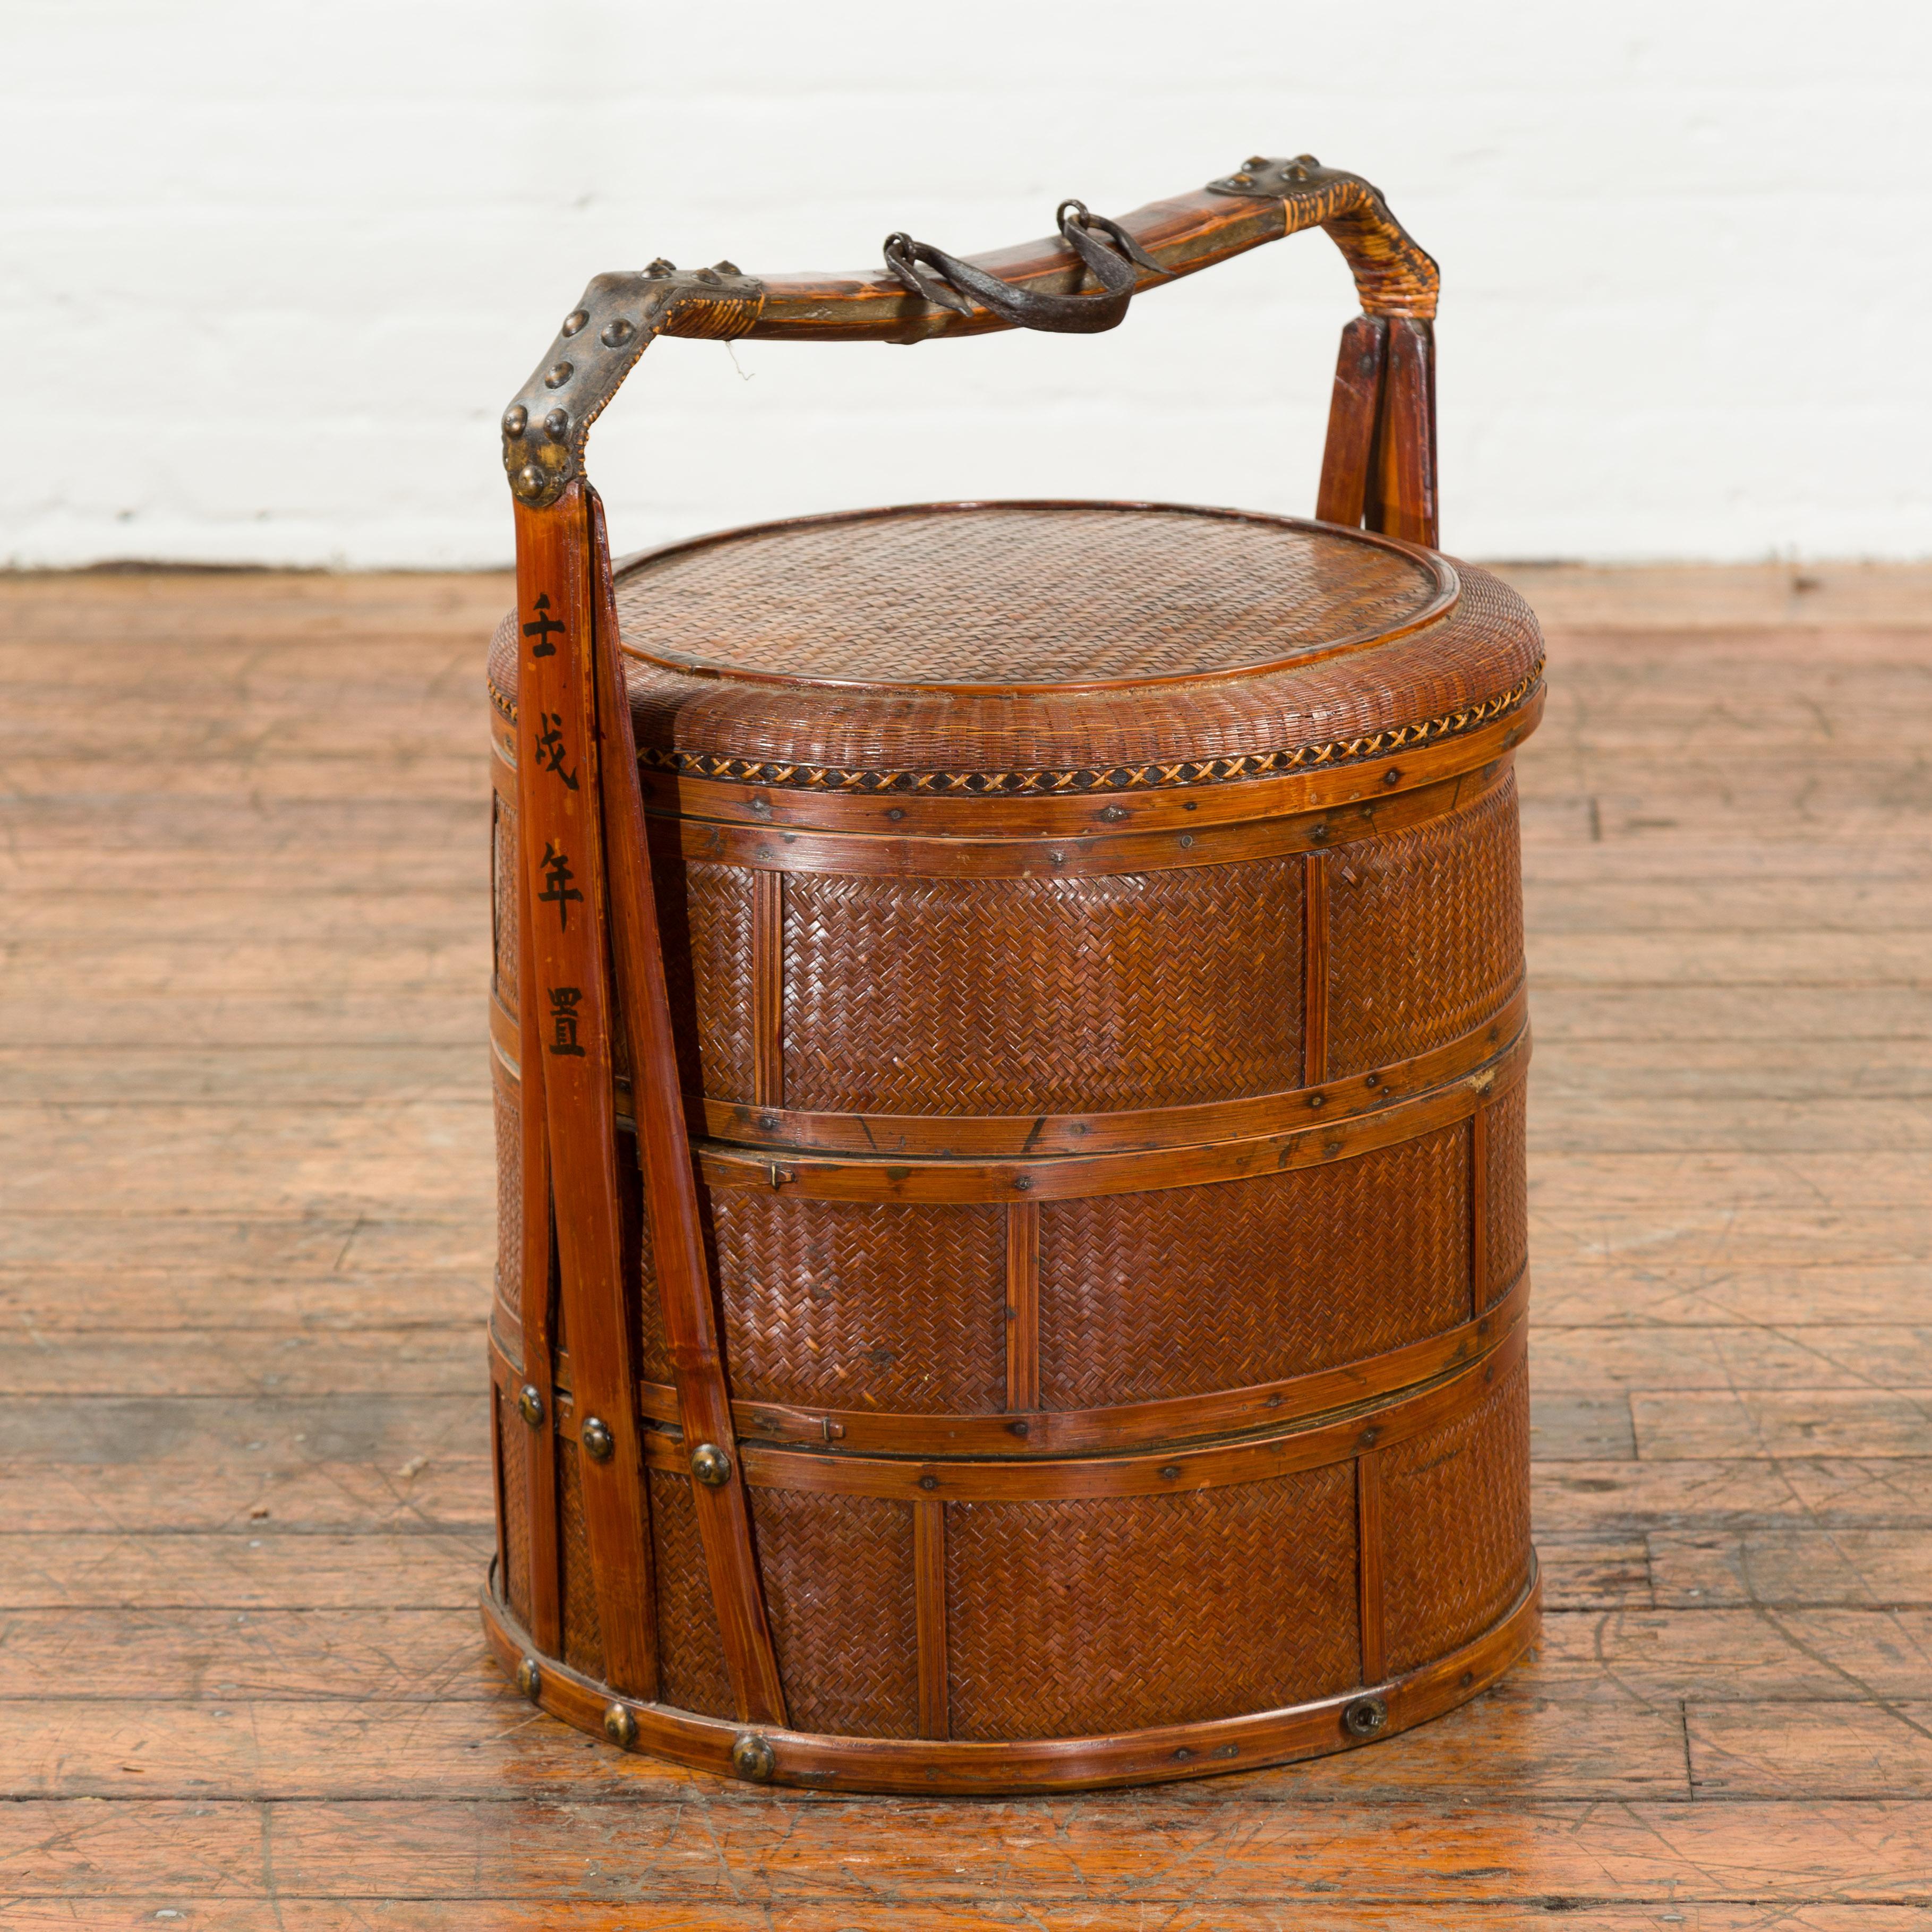 A Chinese antique rattan three-tiered nested food basket from the early 20th century, with calligraphy and iron accents. Created in China during the early years of the 20th century, this food basket features a circular lid, sitting above three